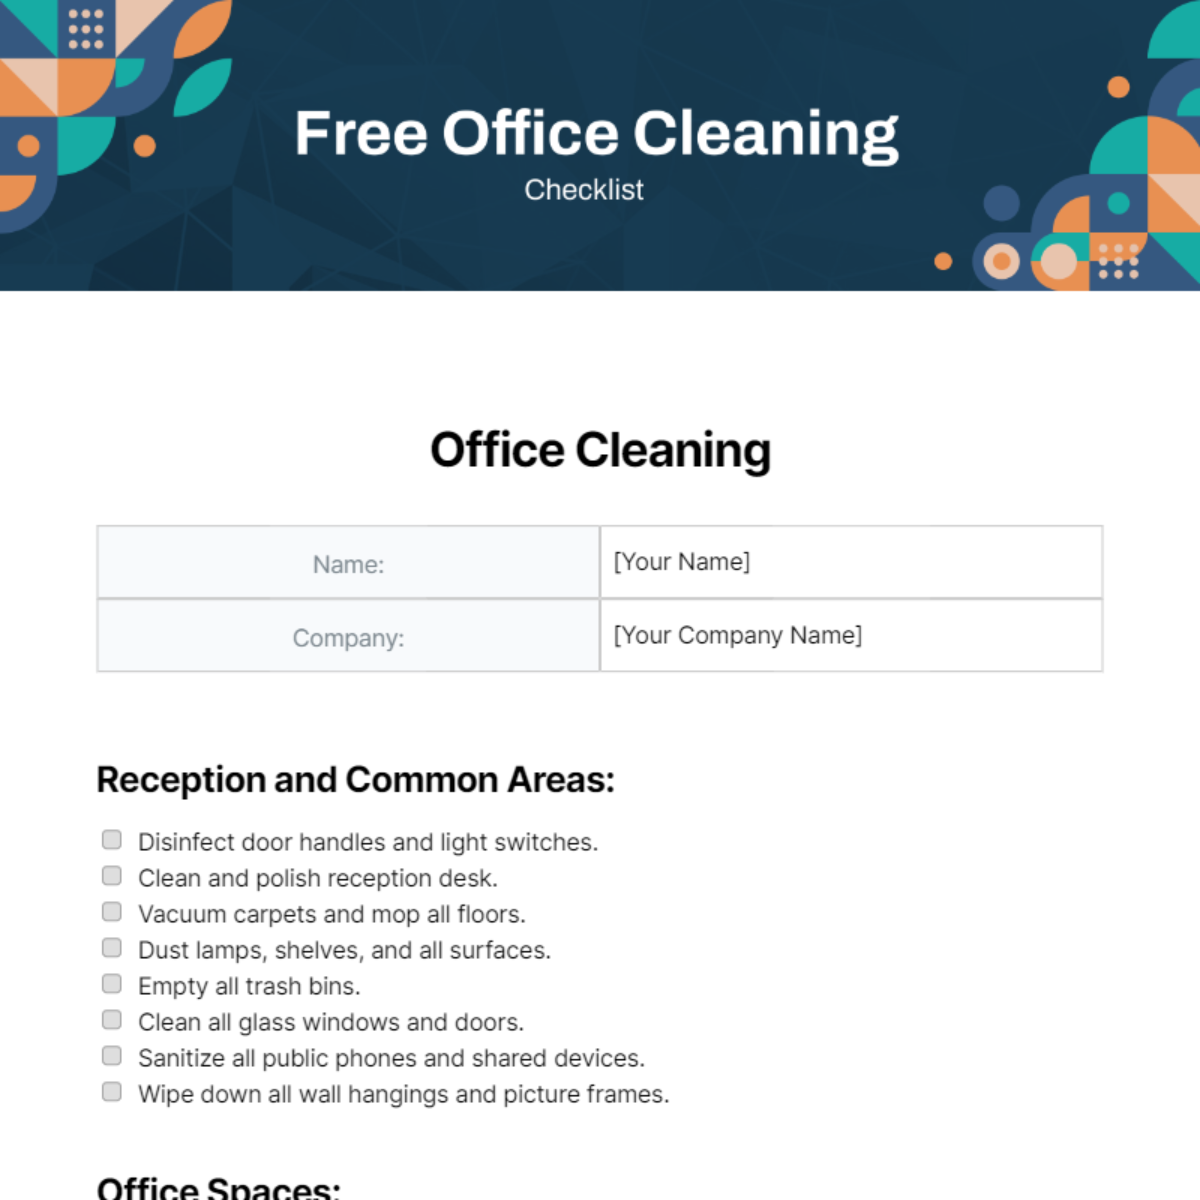 Free Office Cleaning Checklist Template